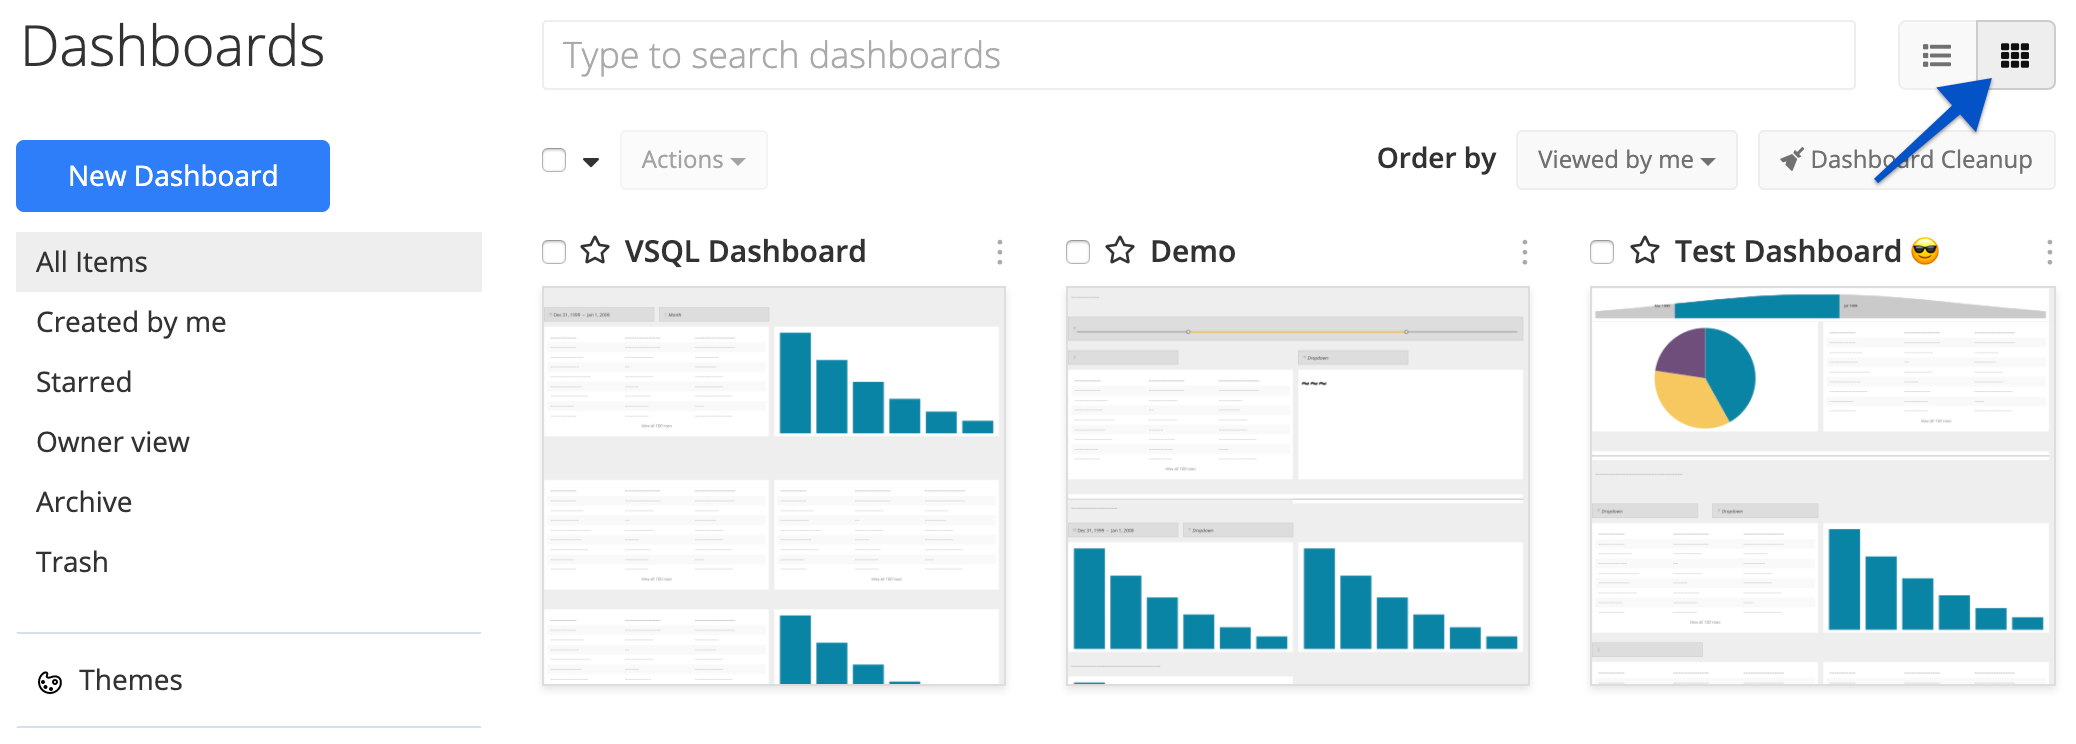 Thumbnail view of dashboards